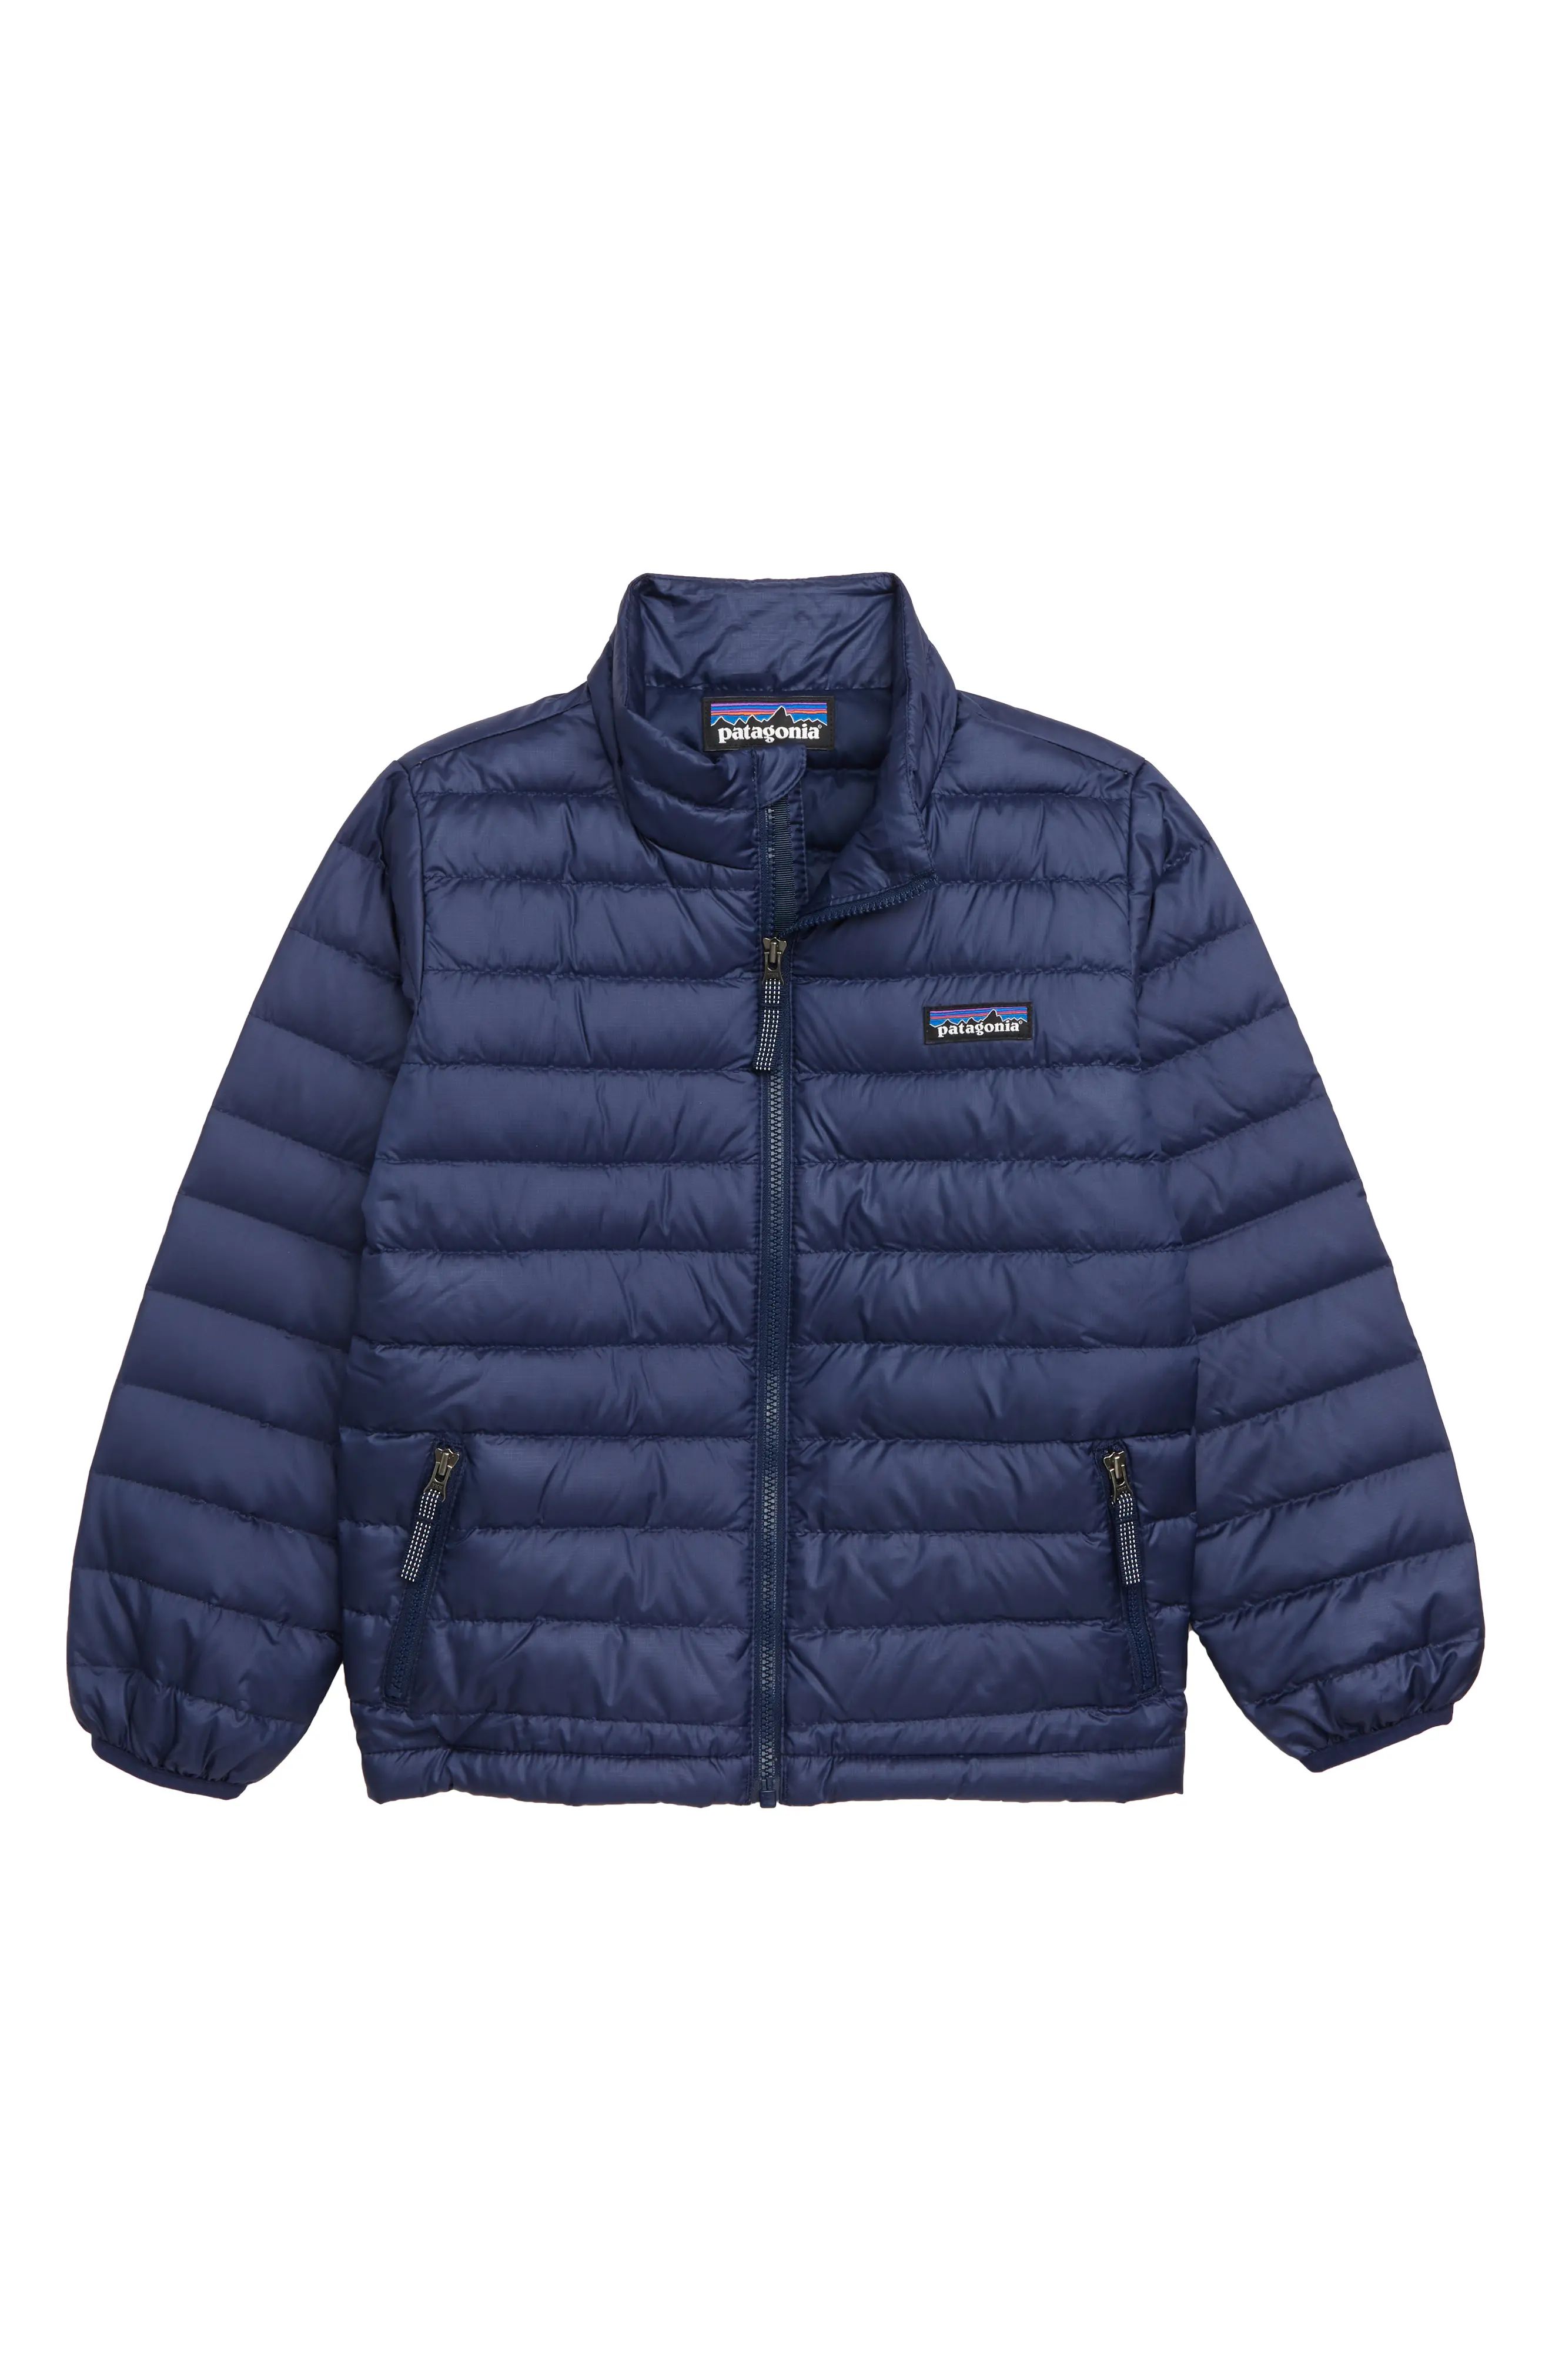 Toddler Boy's Patagonia Water Repellent 600 Fill Power Down Sweater Jacket | Nordstrom